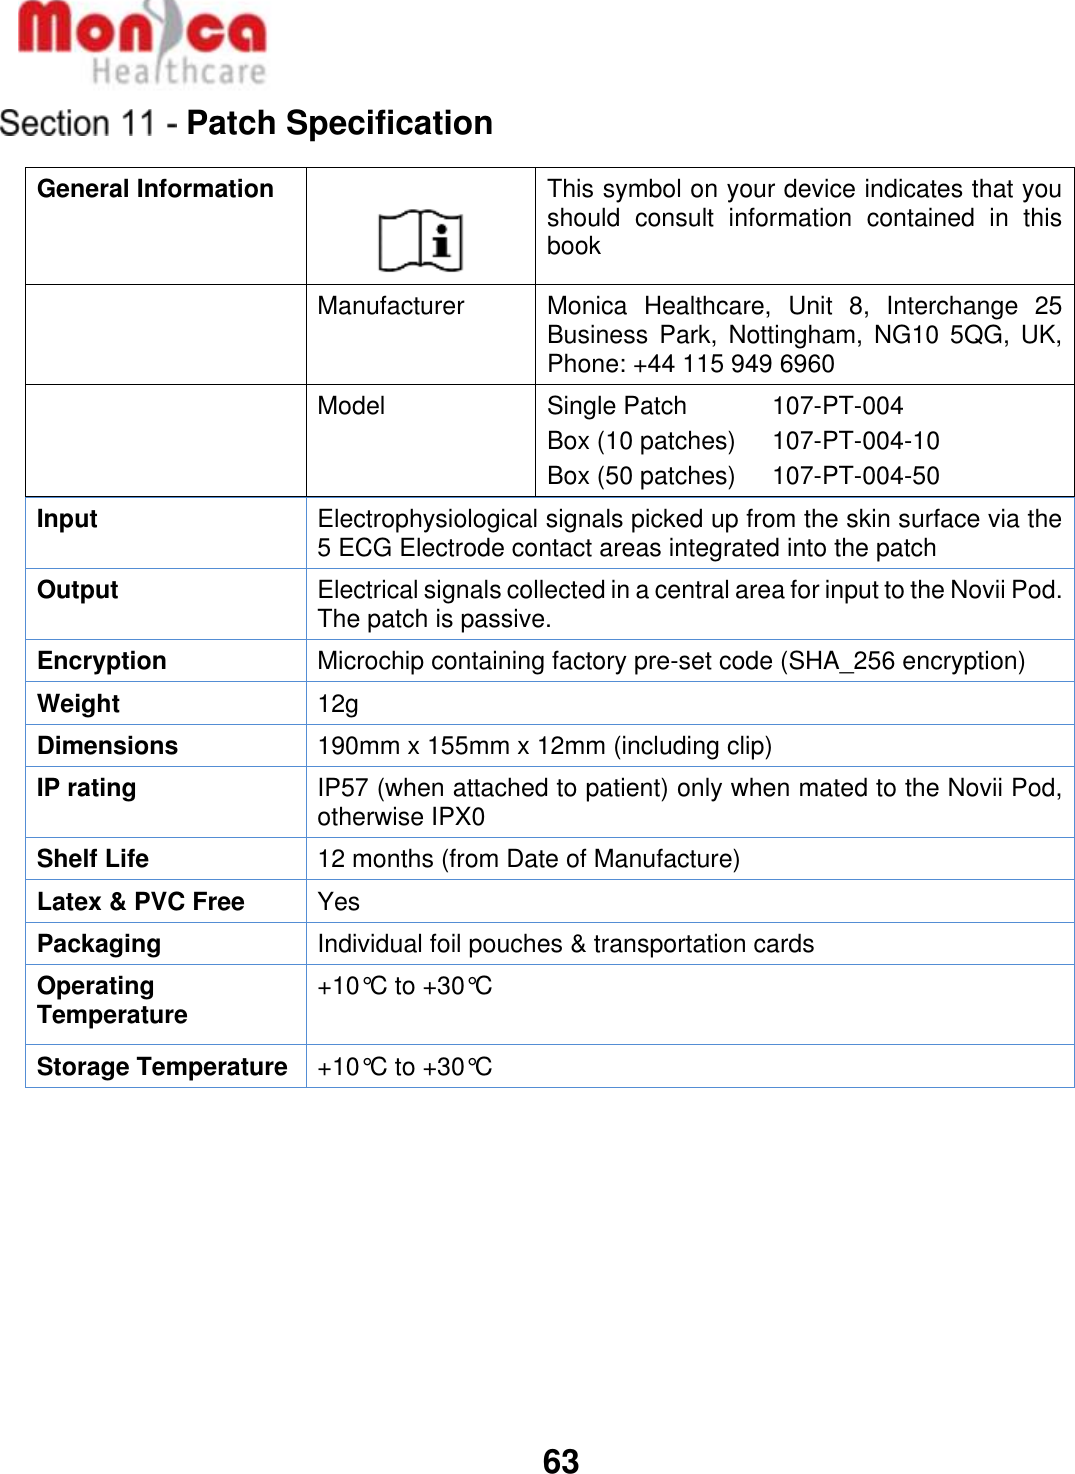   63  Patch Specification General Information   This symbol on your device indicates that you should  consult  information  contained  in  this book  Manufacturer Monica  Healthcare,  Unit  8,  Interchange  25 Business  Park, Nottingham,  NG10  5QG, UK, Phone: +44 115 949 6960  Model Single Patch    107-PT-004 Box (10 patches)    107-PT-004-10 Box (50 patches)    107-PT-004-50 Input Electrophysiological signals picked up from the skin surface via the 5 ECG Electrode contact areas integrated into the patch Output Electrical signals collected in a central area for input to the Novii Pod. The patch is passive. Encryption Microchip containing factory pre-set code (SHA_256 encryption) Weight 12g Dimensions 190mm x 155mm x 12mm (including clip) IP rating IP57 (when attached to patient) only when mated to the Novii Pod, otherwise IPX0 Shelf Life 12 months (from Date of Manufacture) Latex &amp; PVC Free Yes Packaging Individual foil pouches &amp; transportation cards Operating Temperature +10°C to +30°C  Storage Temperature +10°C to +30°C      